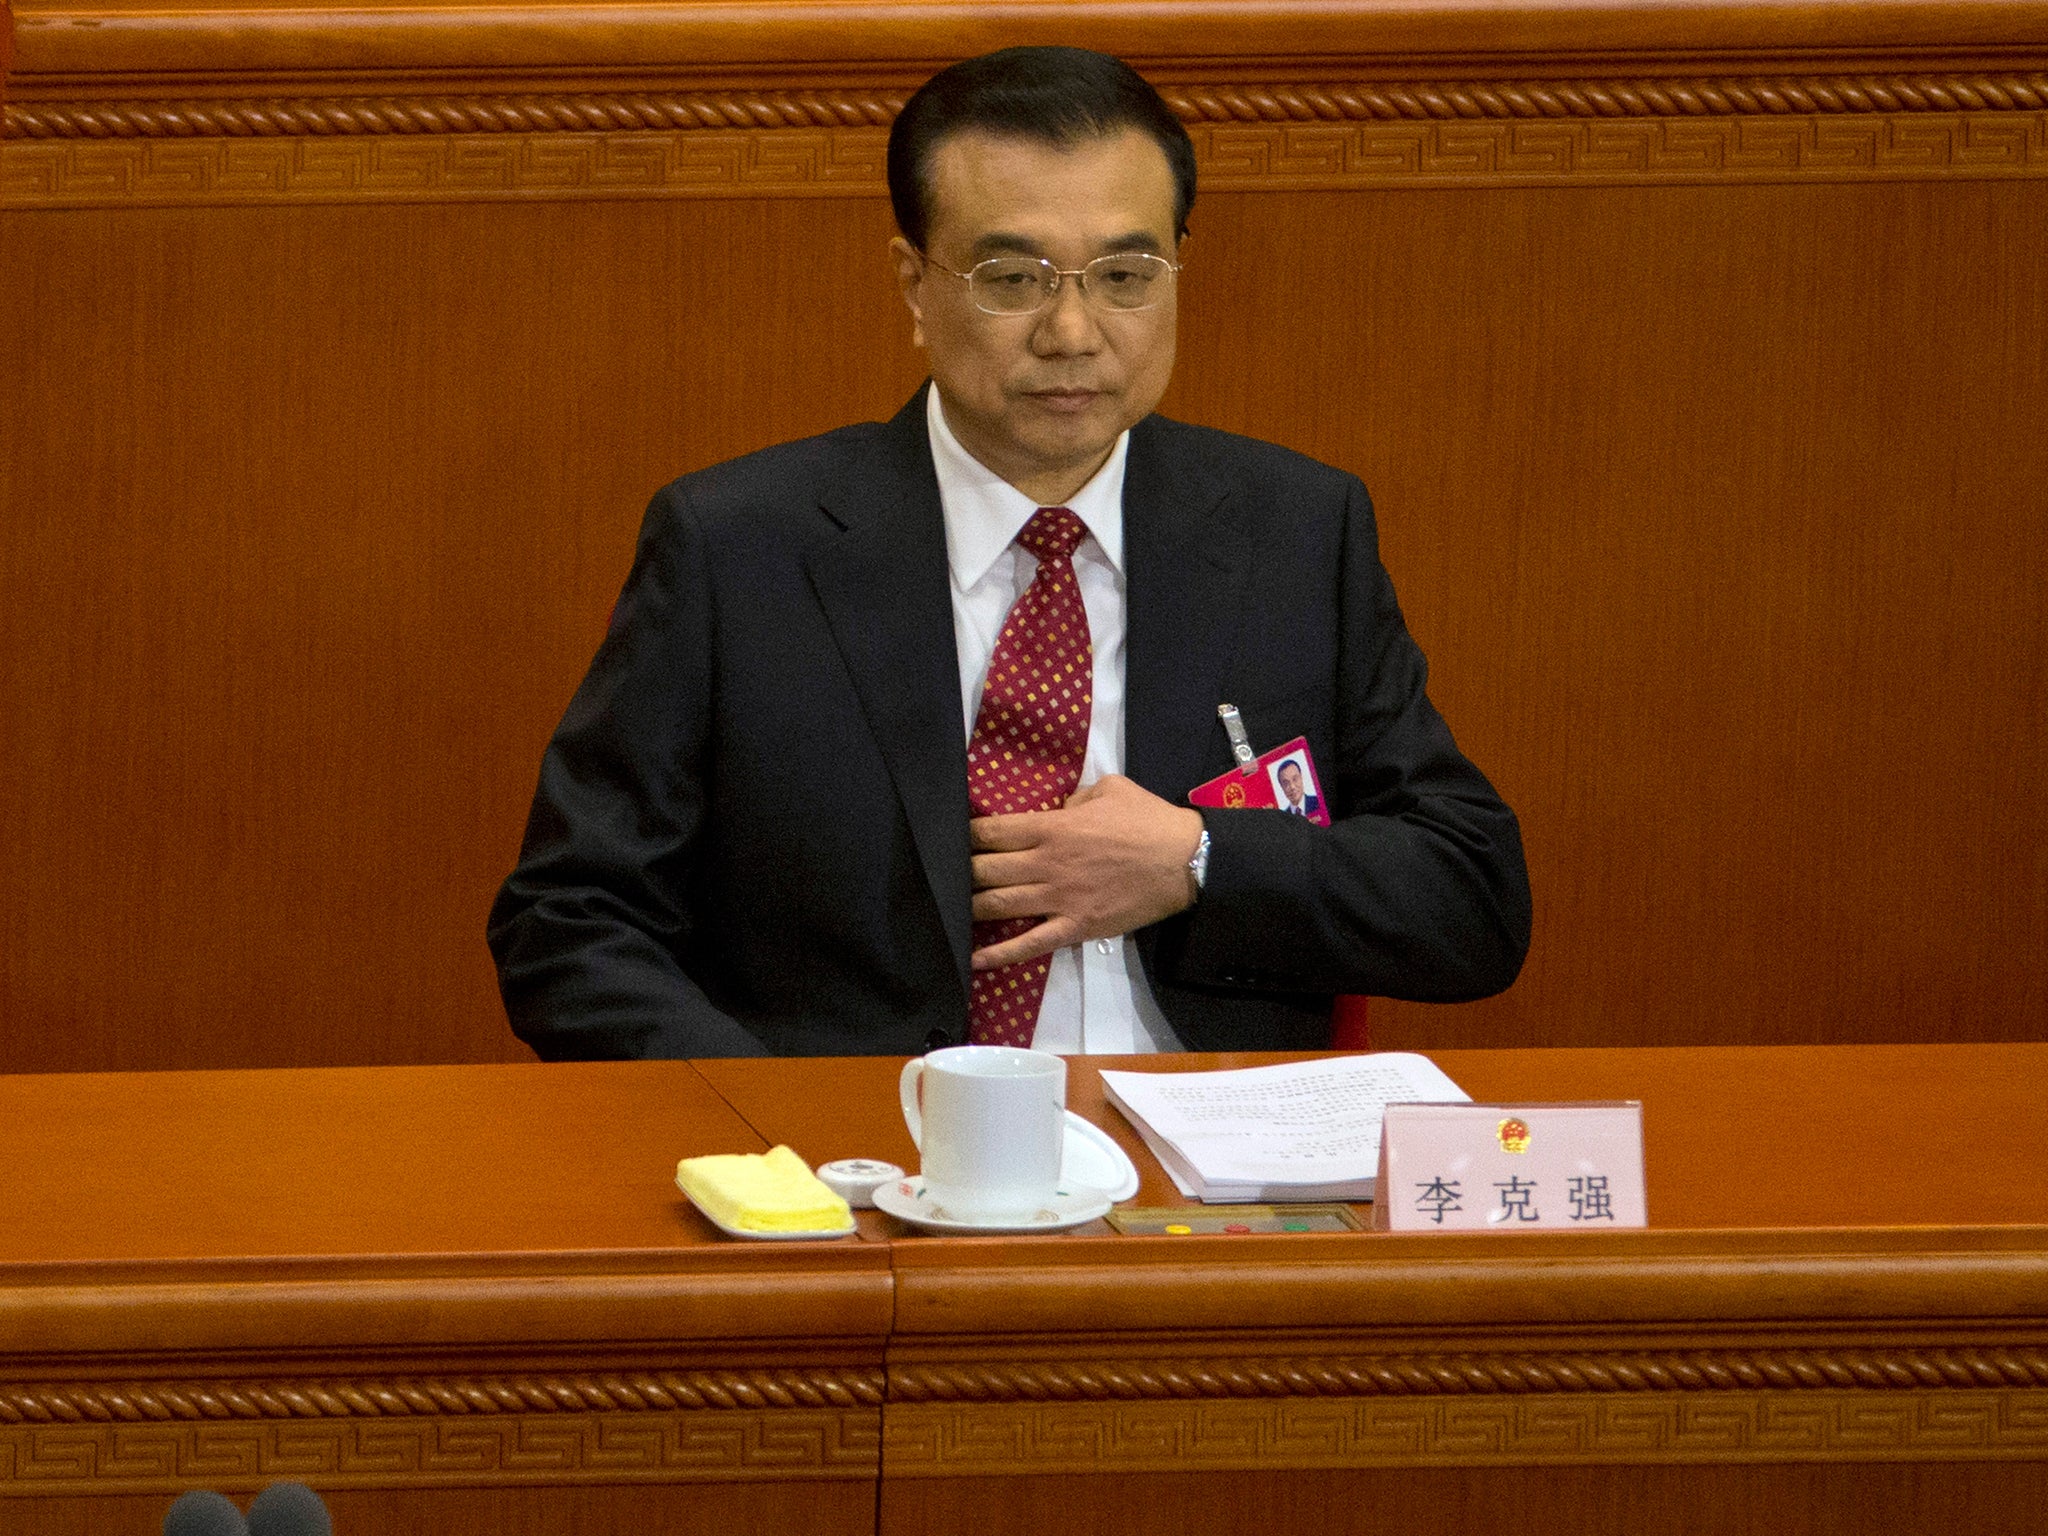 Premier Li Keqiang said the emphasis this year would be on creating jobs